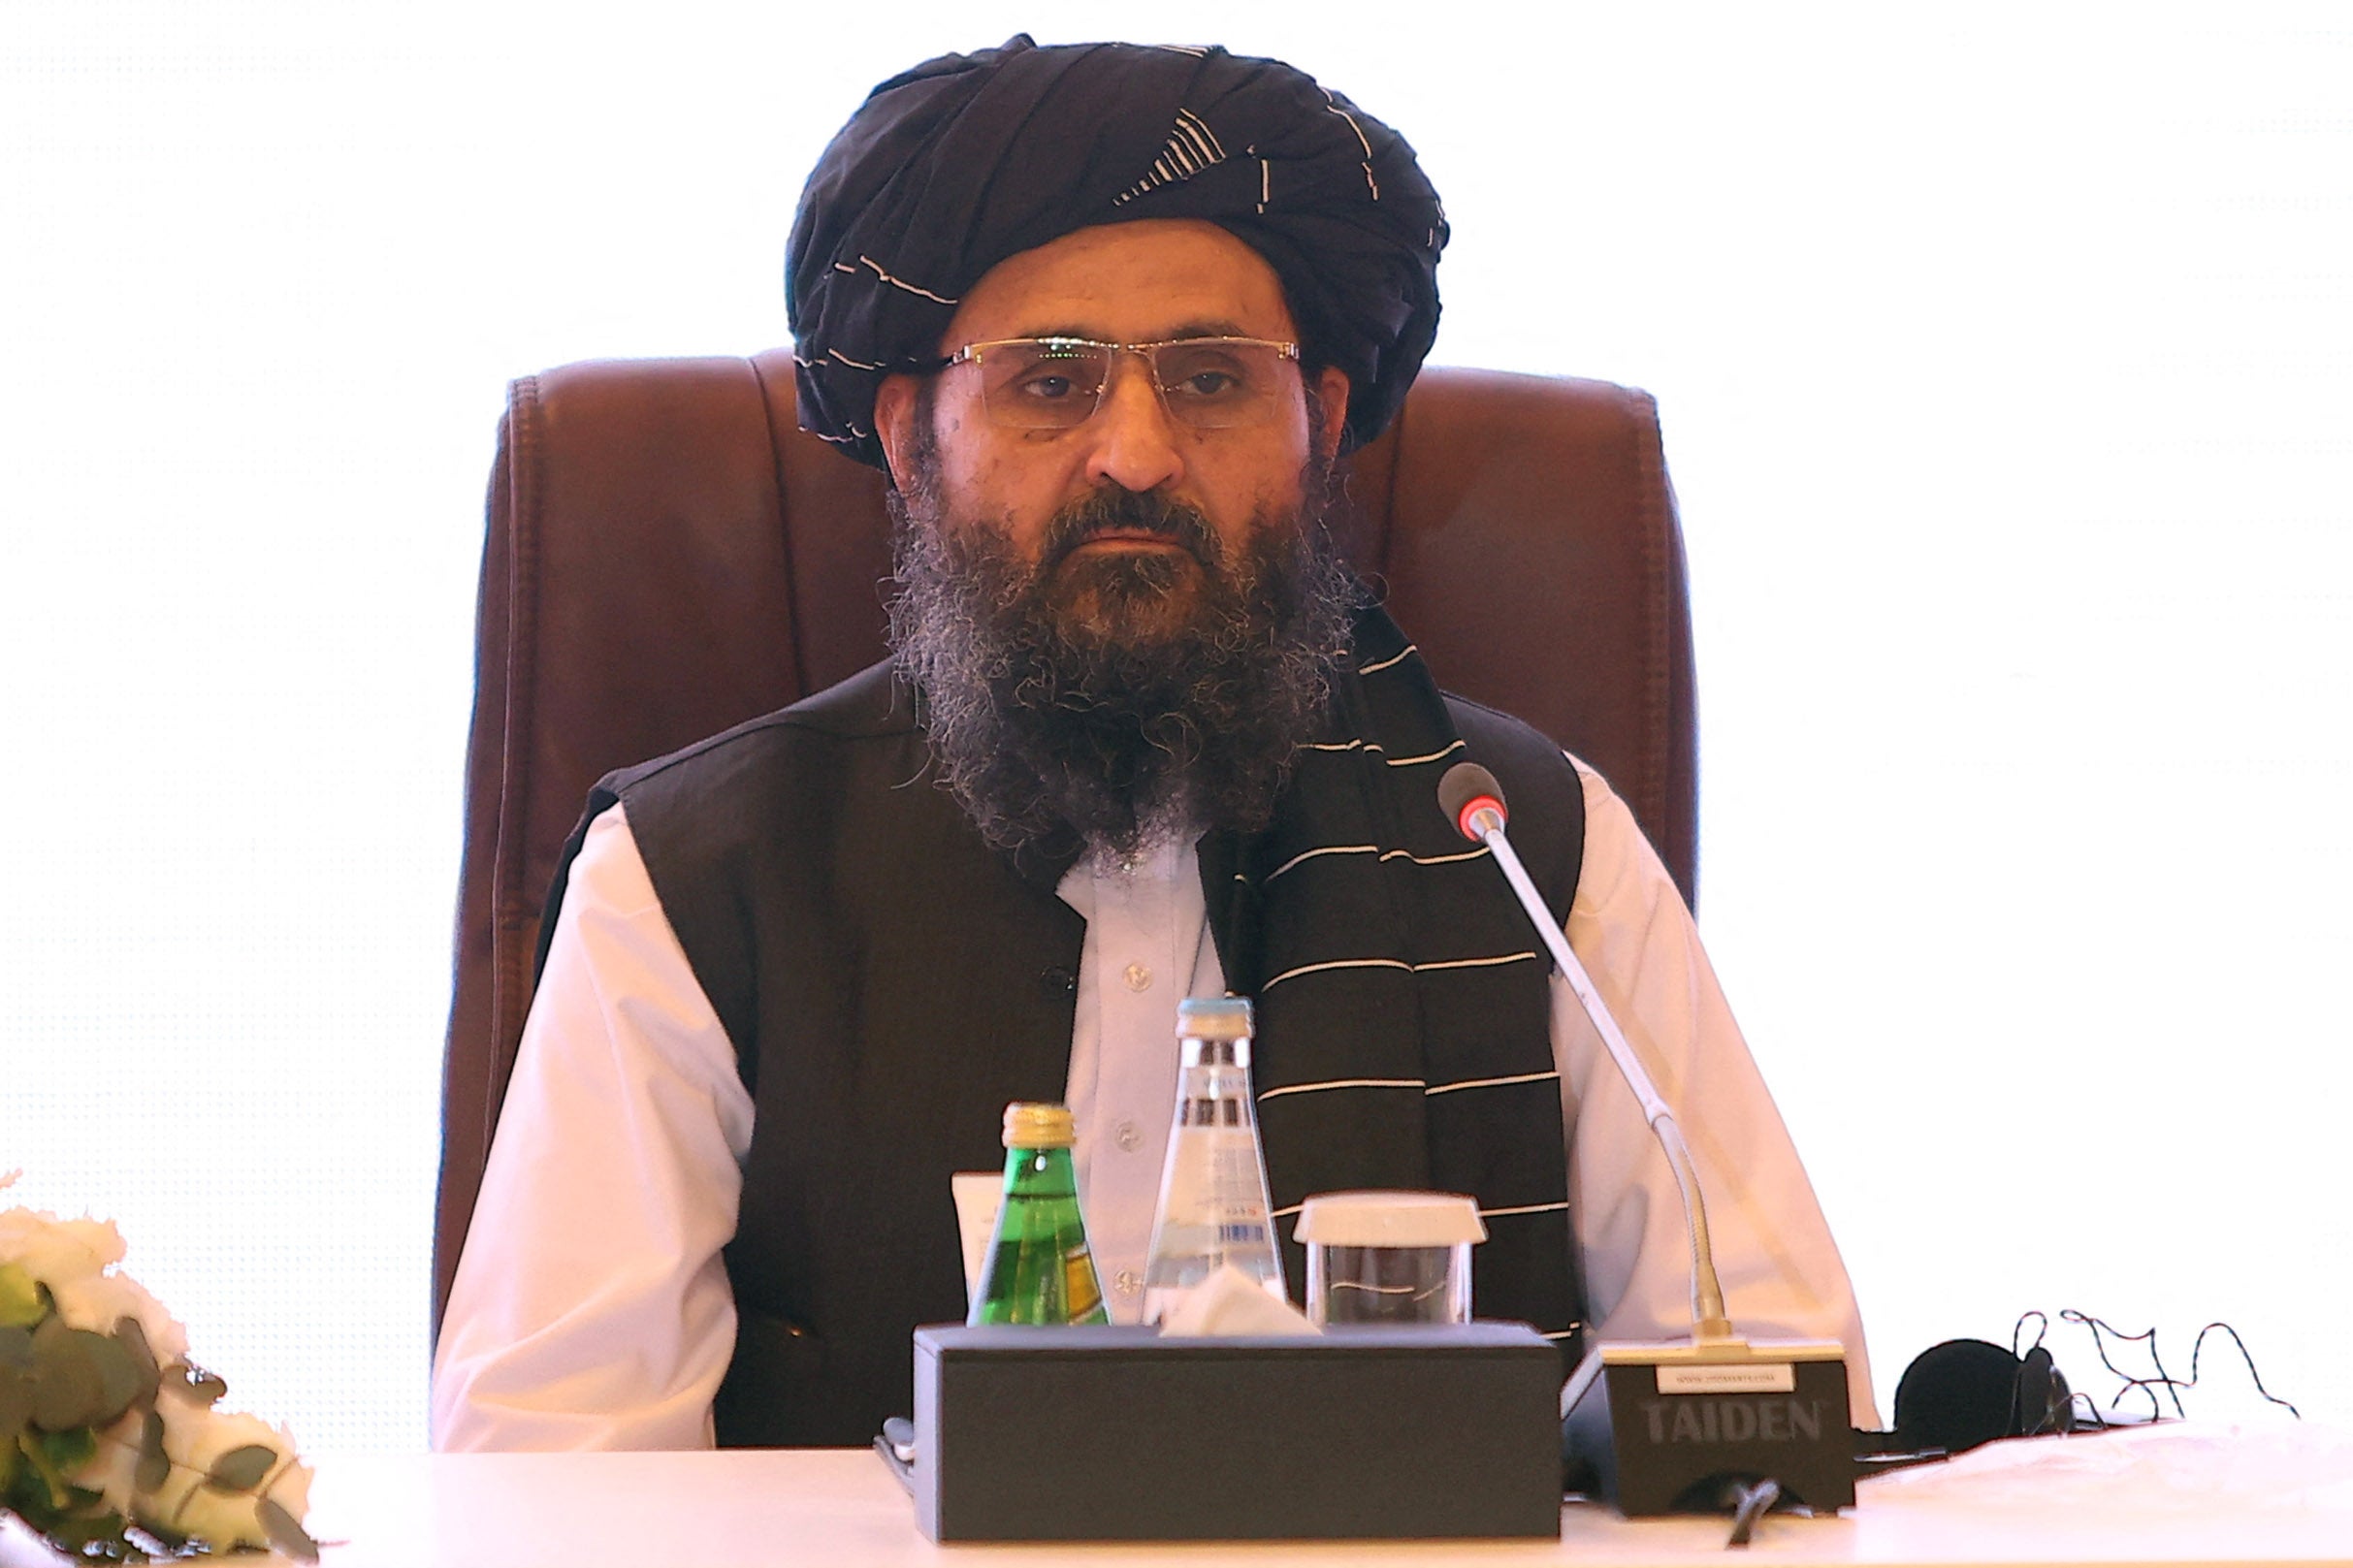 Taliban co-founder and new deputy prime minister Mullah Abdul Ghani Baradar is at the centre of an internal rift